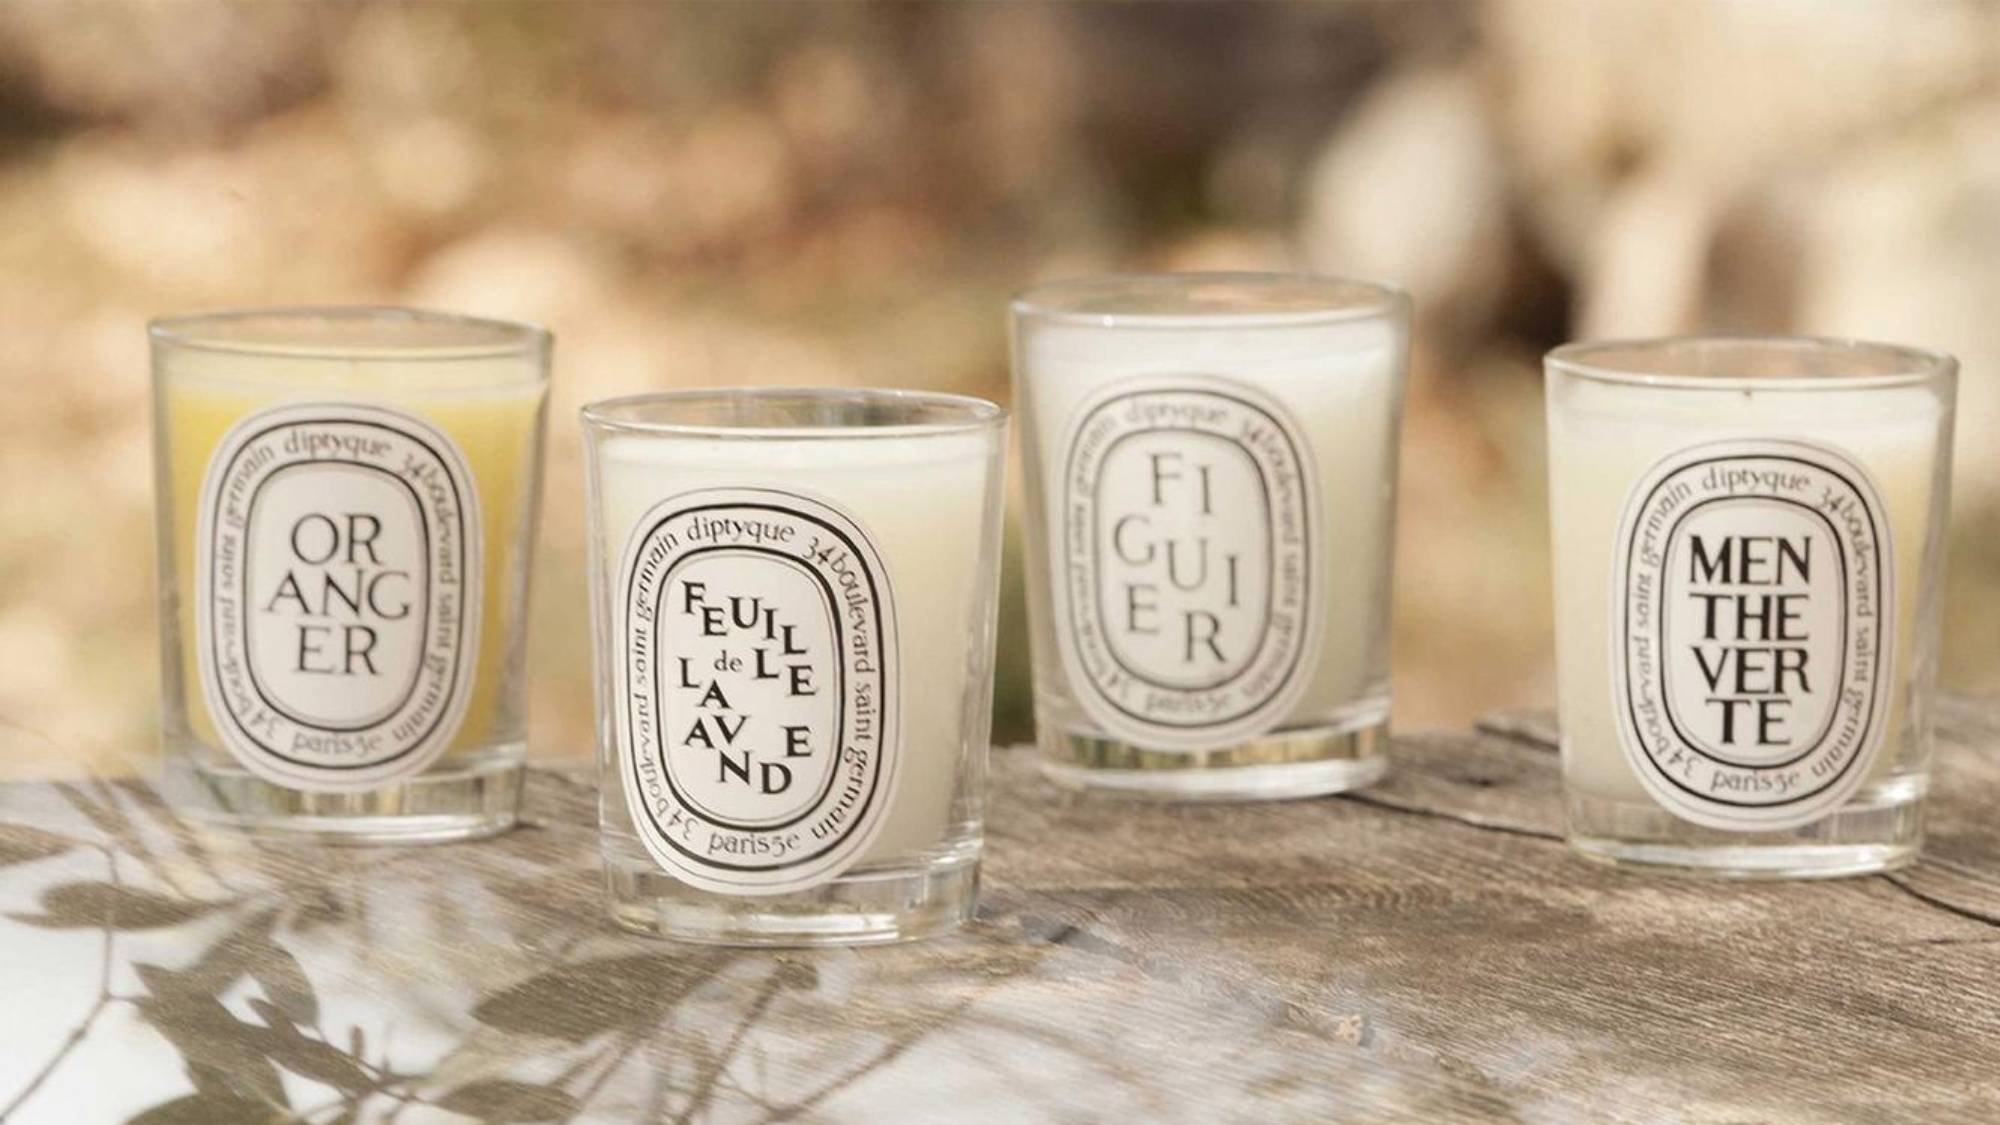 Diptyque Cyber Monday 2021: 20% off candles & fragrances at Selfridges